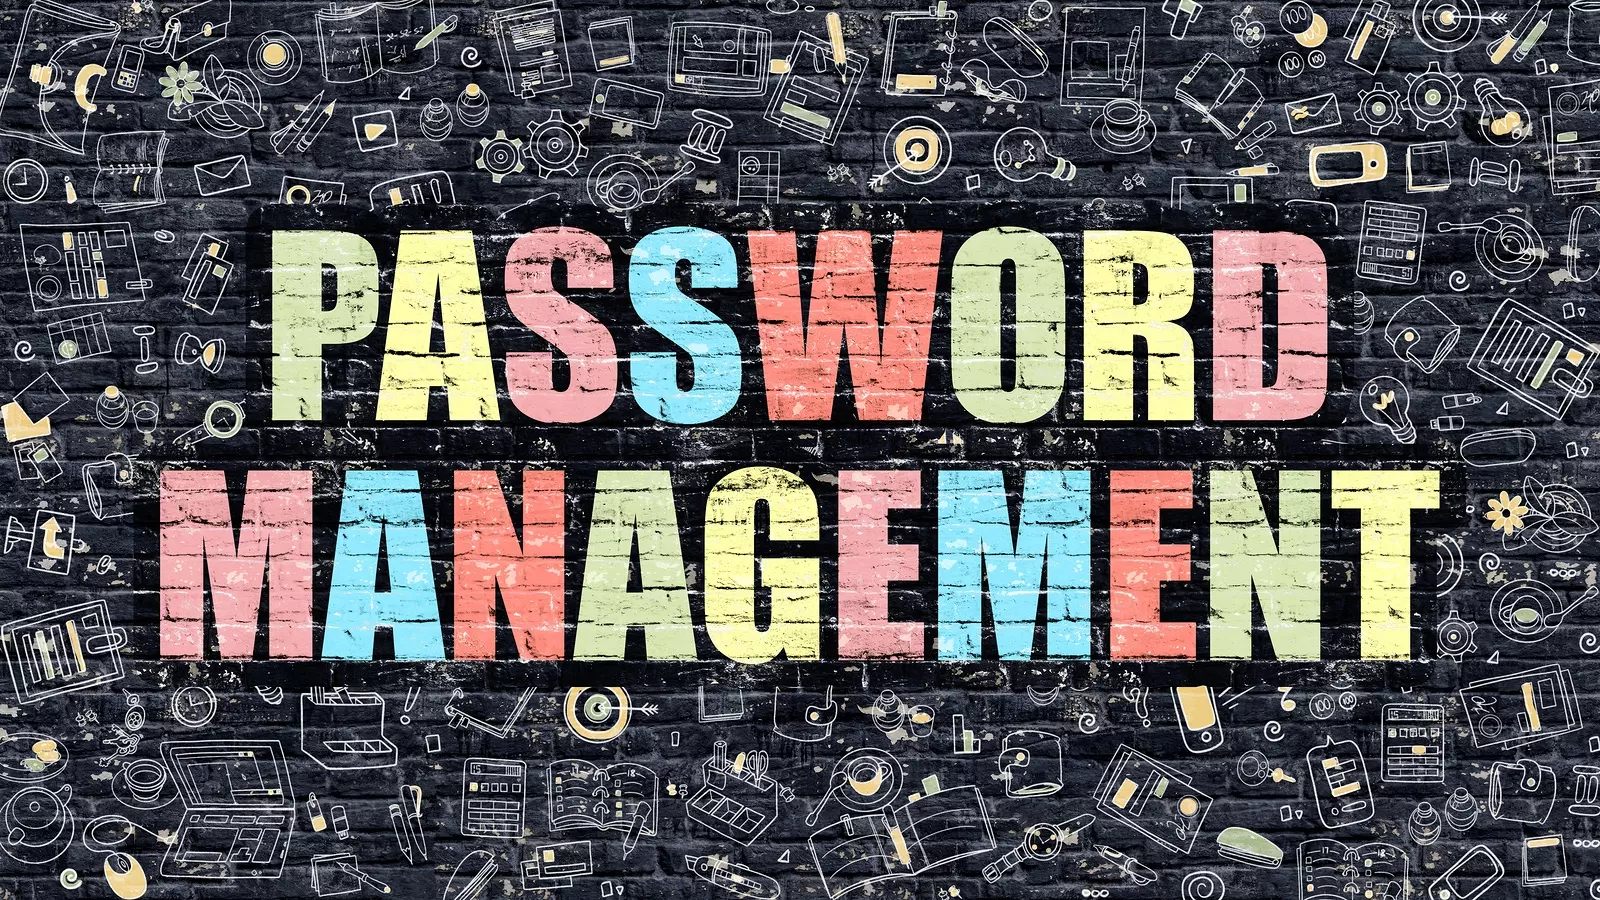 Say goodbye to your easy passwords